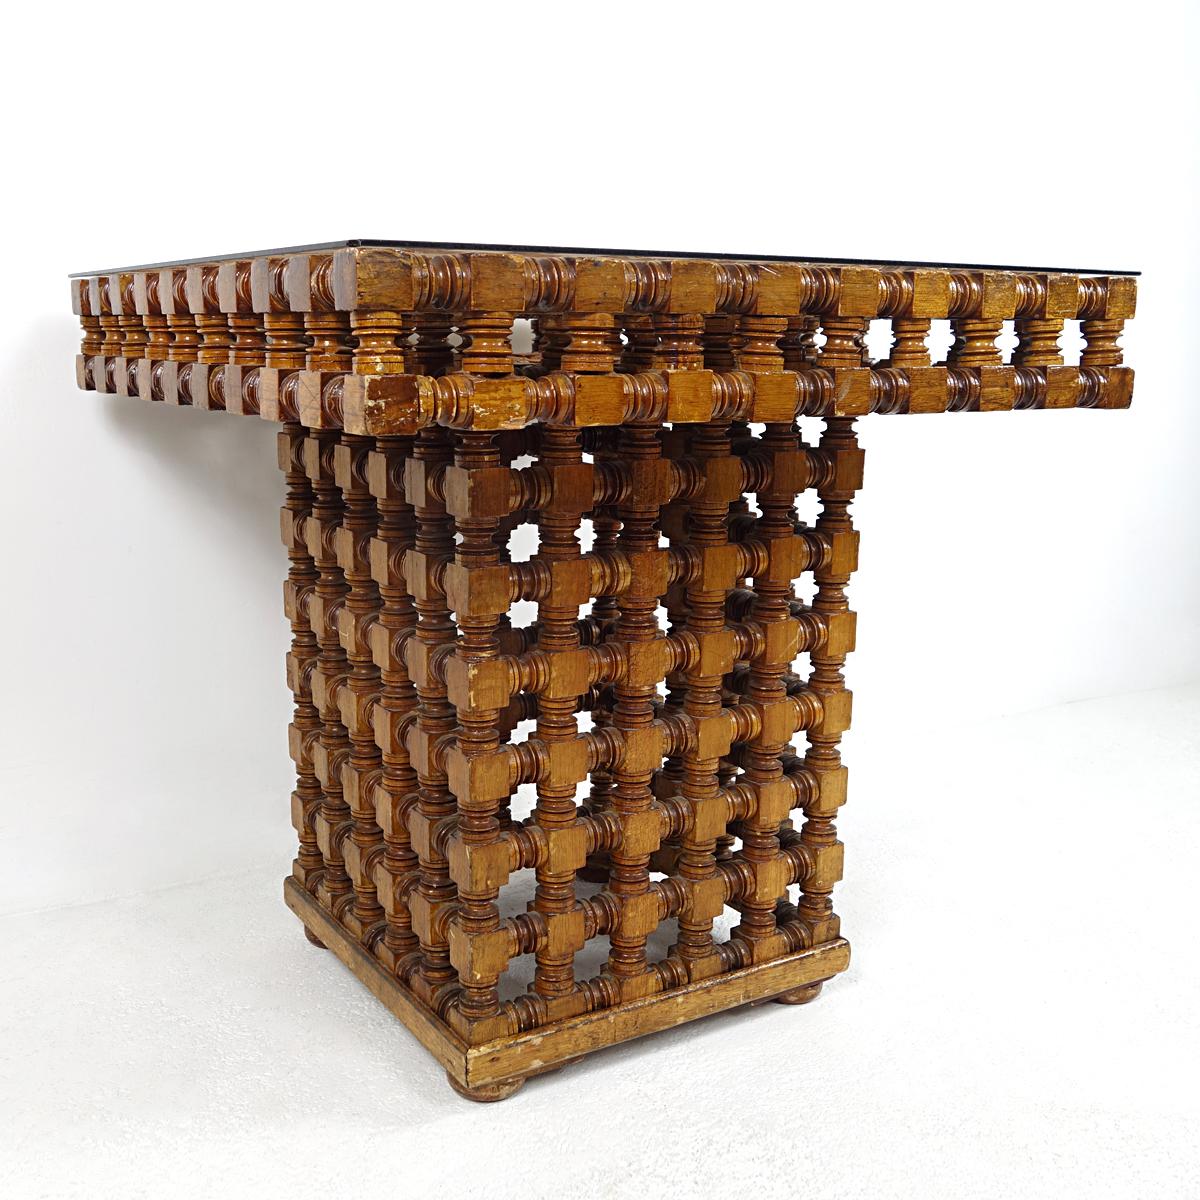 Moroccan coffee table handmade in the beginning of the 20th century.
The carved wood is a representation of the ancient Mashrabiya style, characteristic of traditional architecture in the Islamic world, used to keep the sun out and let the wind in.